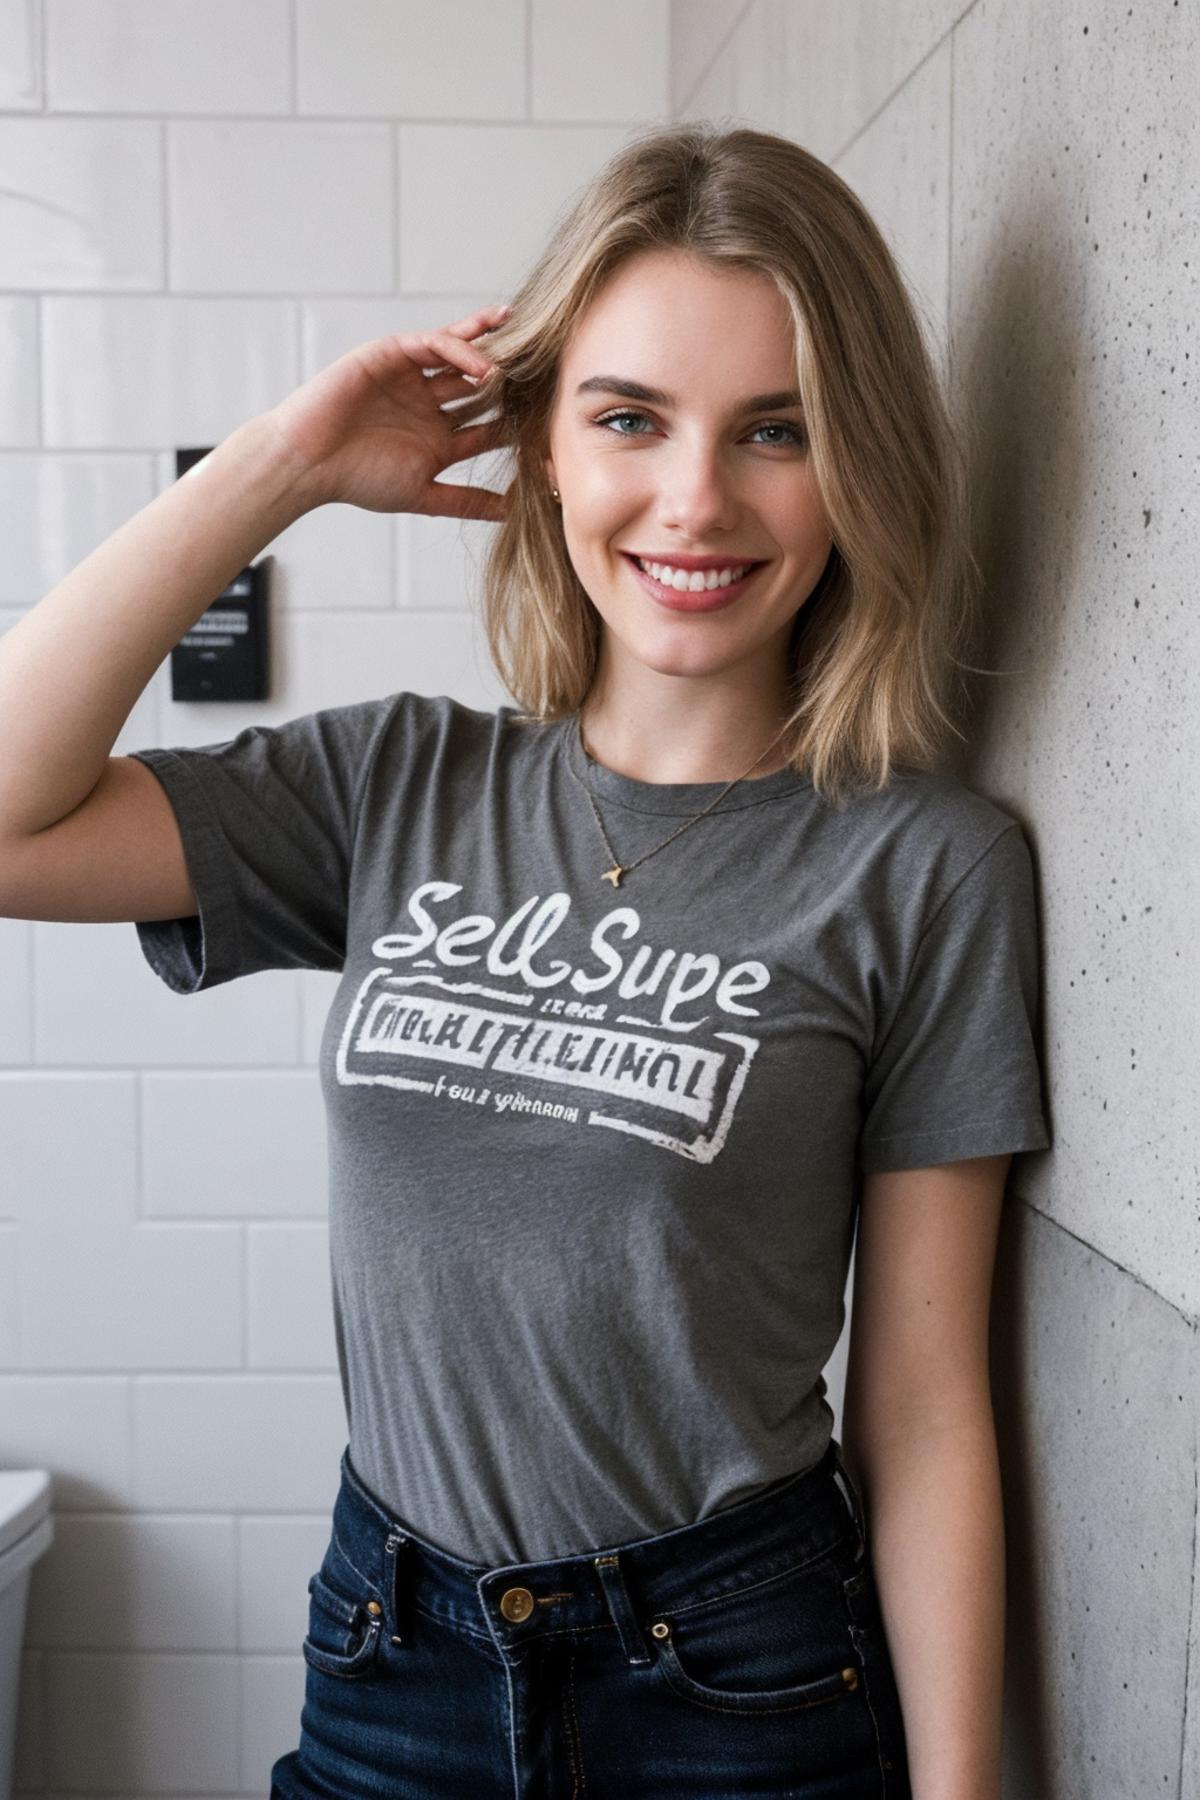 A smiling woman wearing a shirt that says "SELL SUPRE" leans against a wall.